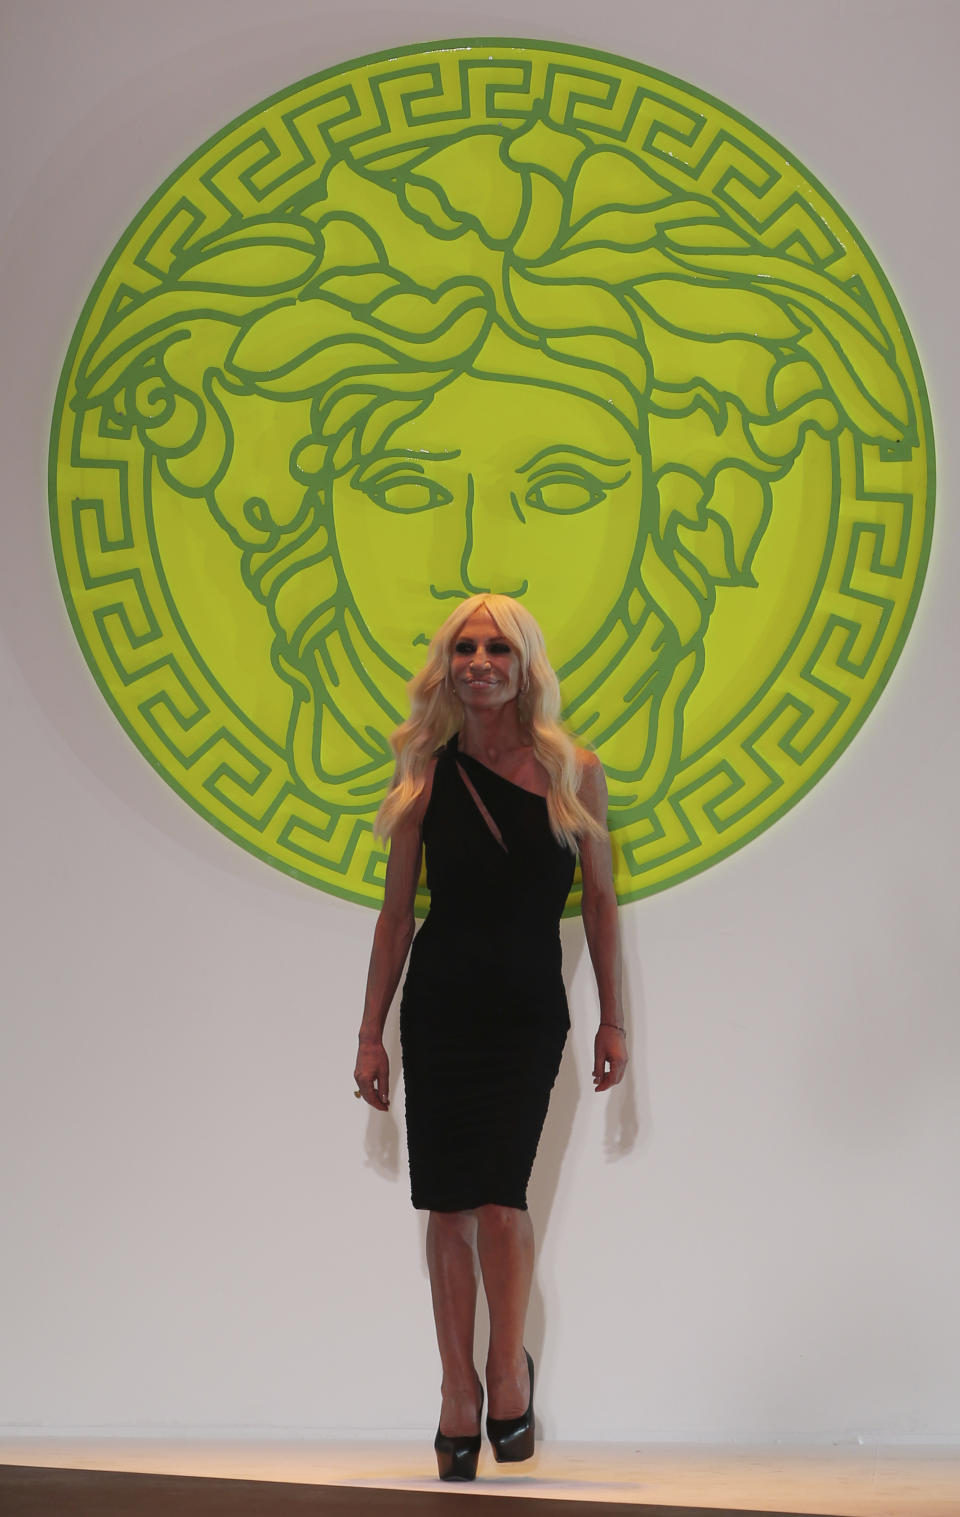 Italian fashion designer Donatella Versace walks on the catwalk at the end of the Versace men's Spring-Summer 2014 fashion show, part of the Milan Fashion Week, unveiled in Milan, Italy, Saturday, June 22, 2013. (AP Photo/Luca Bruno)